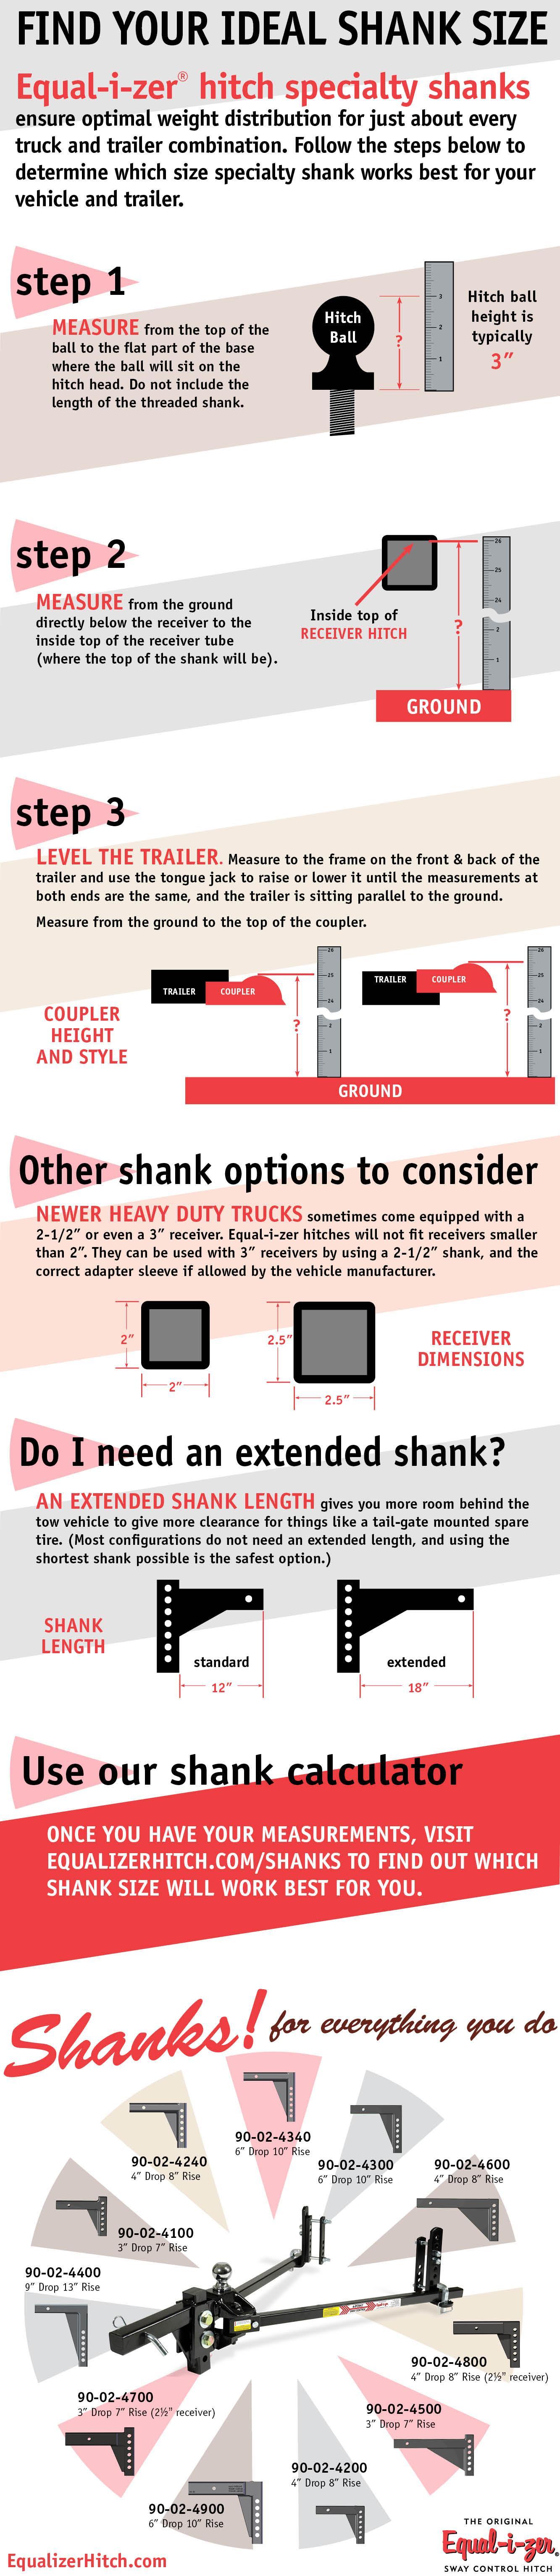 how to choose the best shank size for your tow vehicle and trailer.